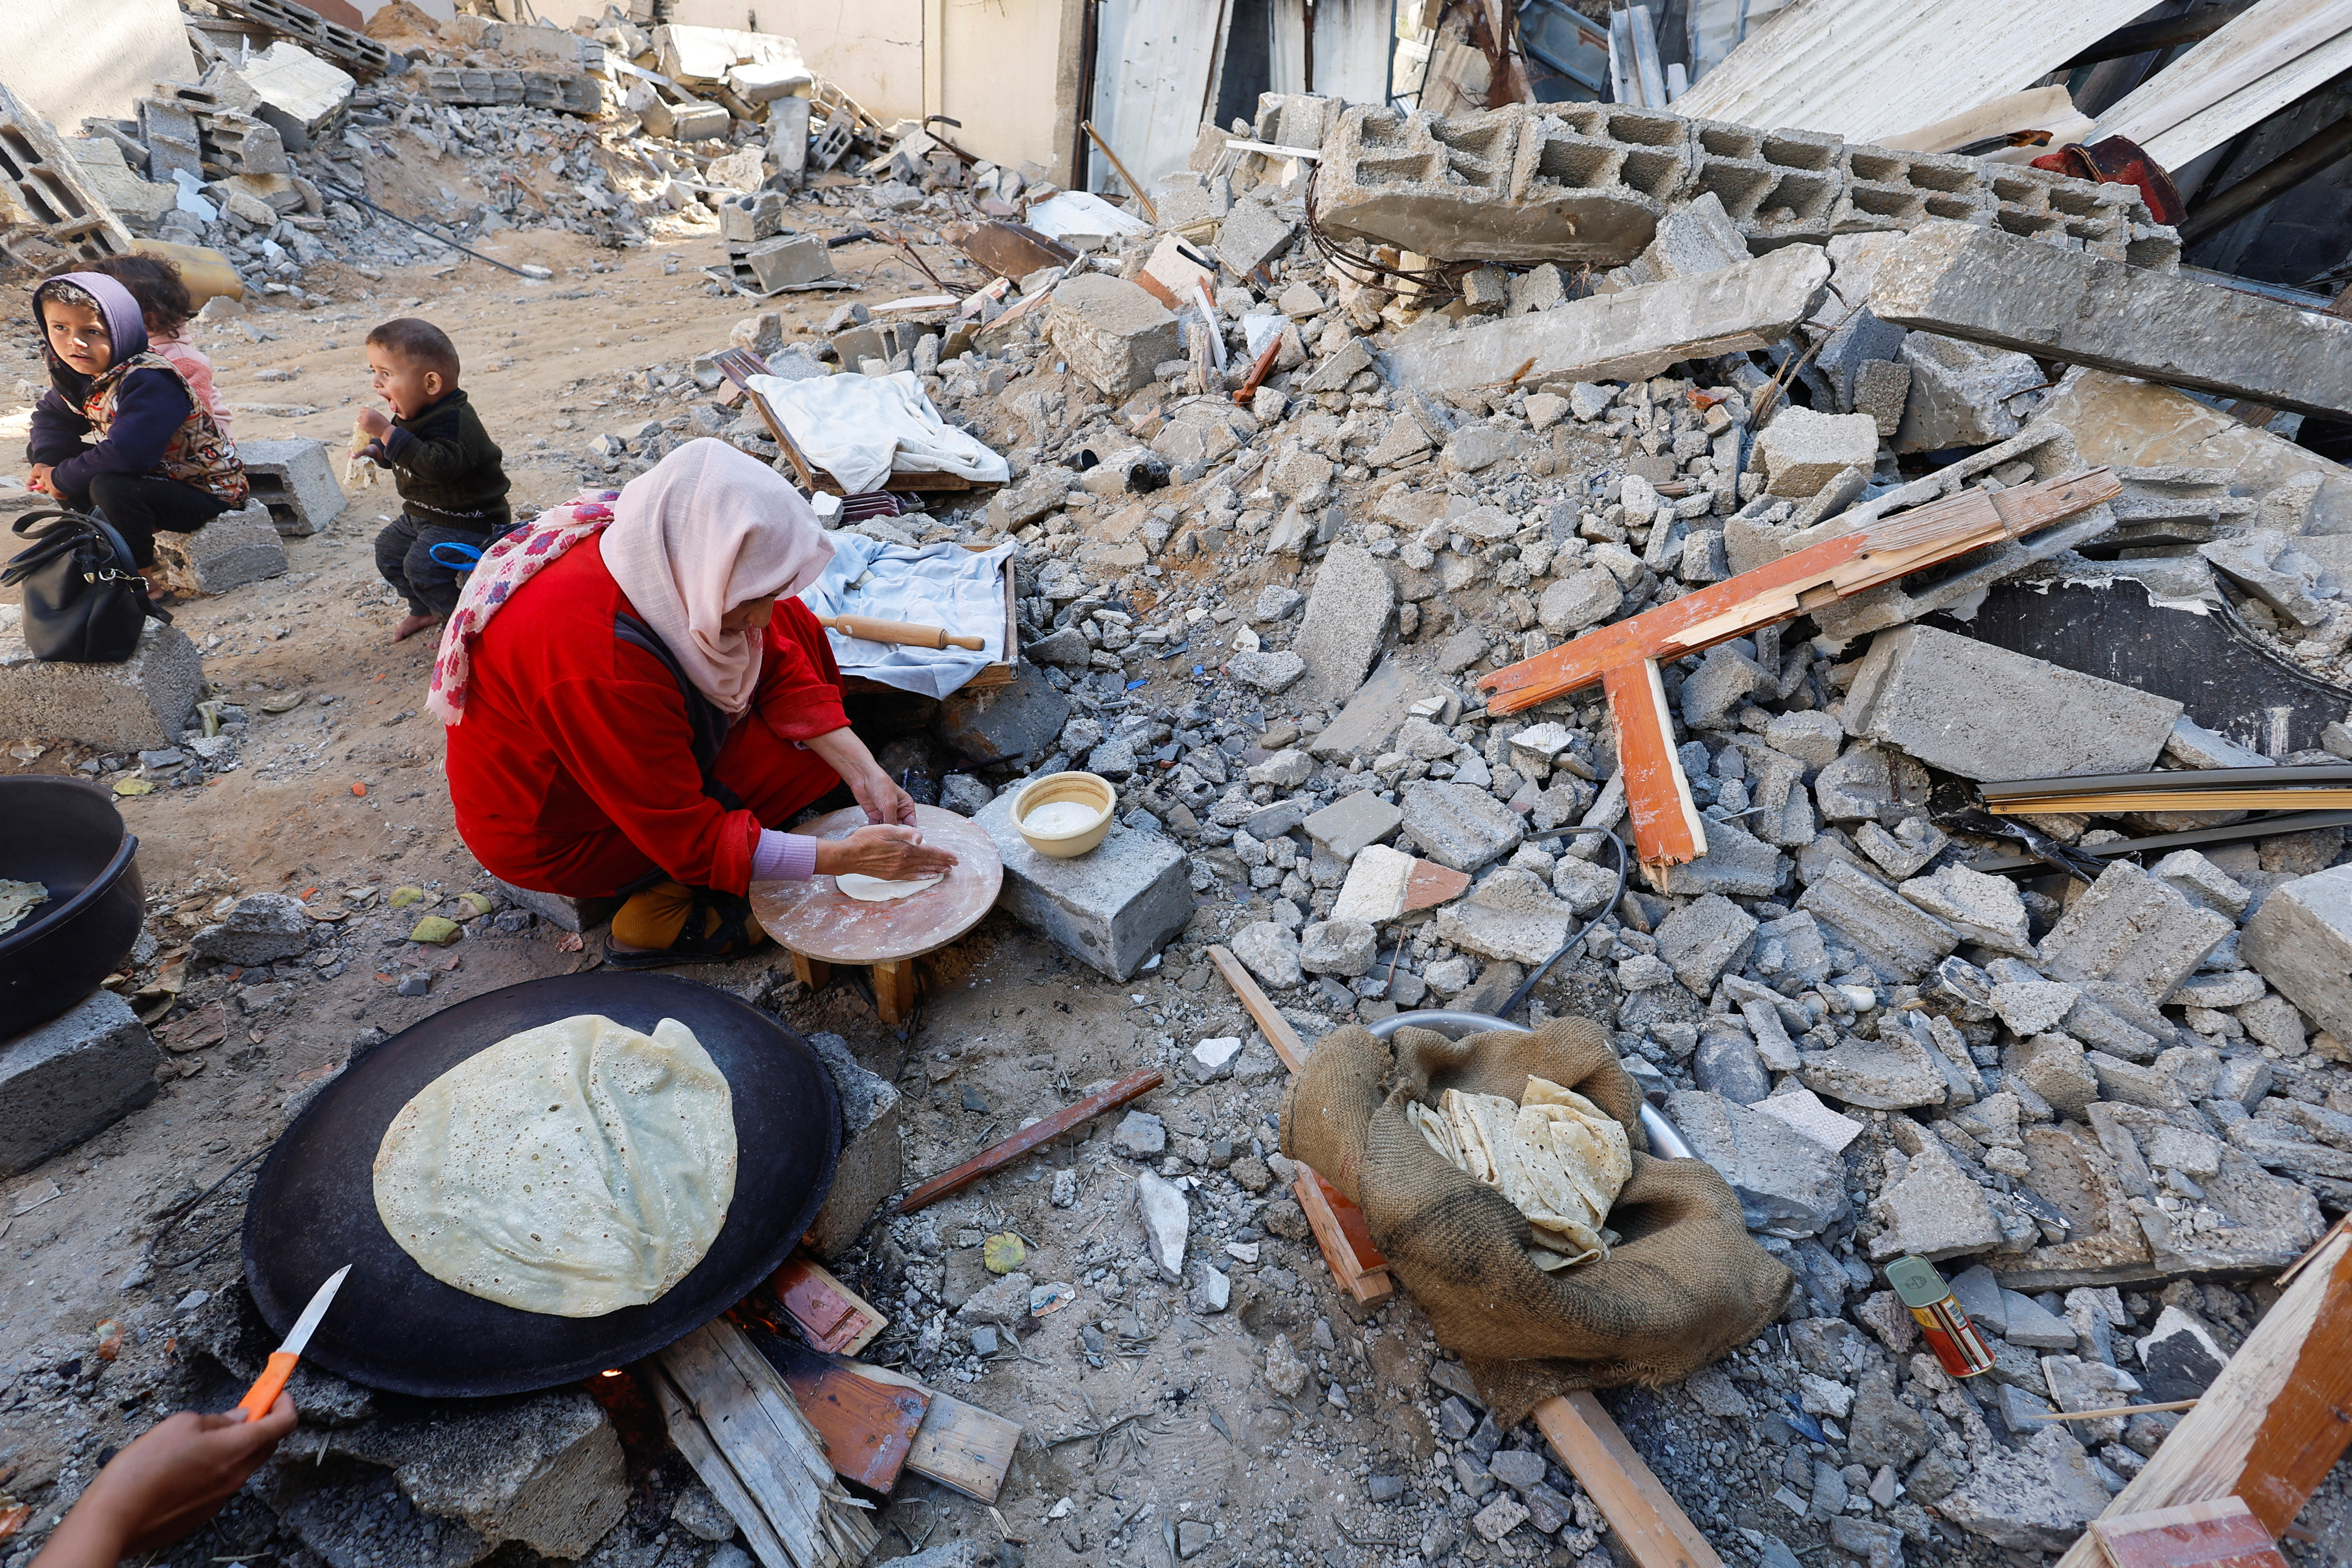 Israel and Hamas struck a last-minute deal to extend their ceasefire for a seventh day. Here, Palestinians make the most of the break in the conflict to bake bread amid the ruins of a missile strike in Gaza. /Mohammed Salem/Reuters